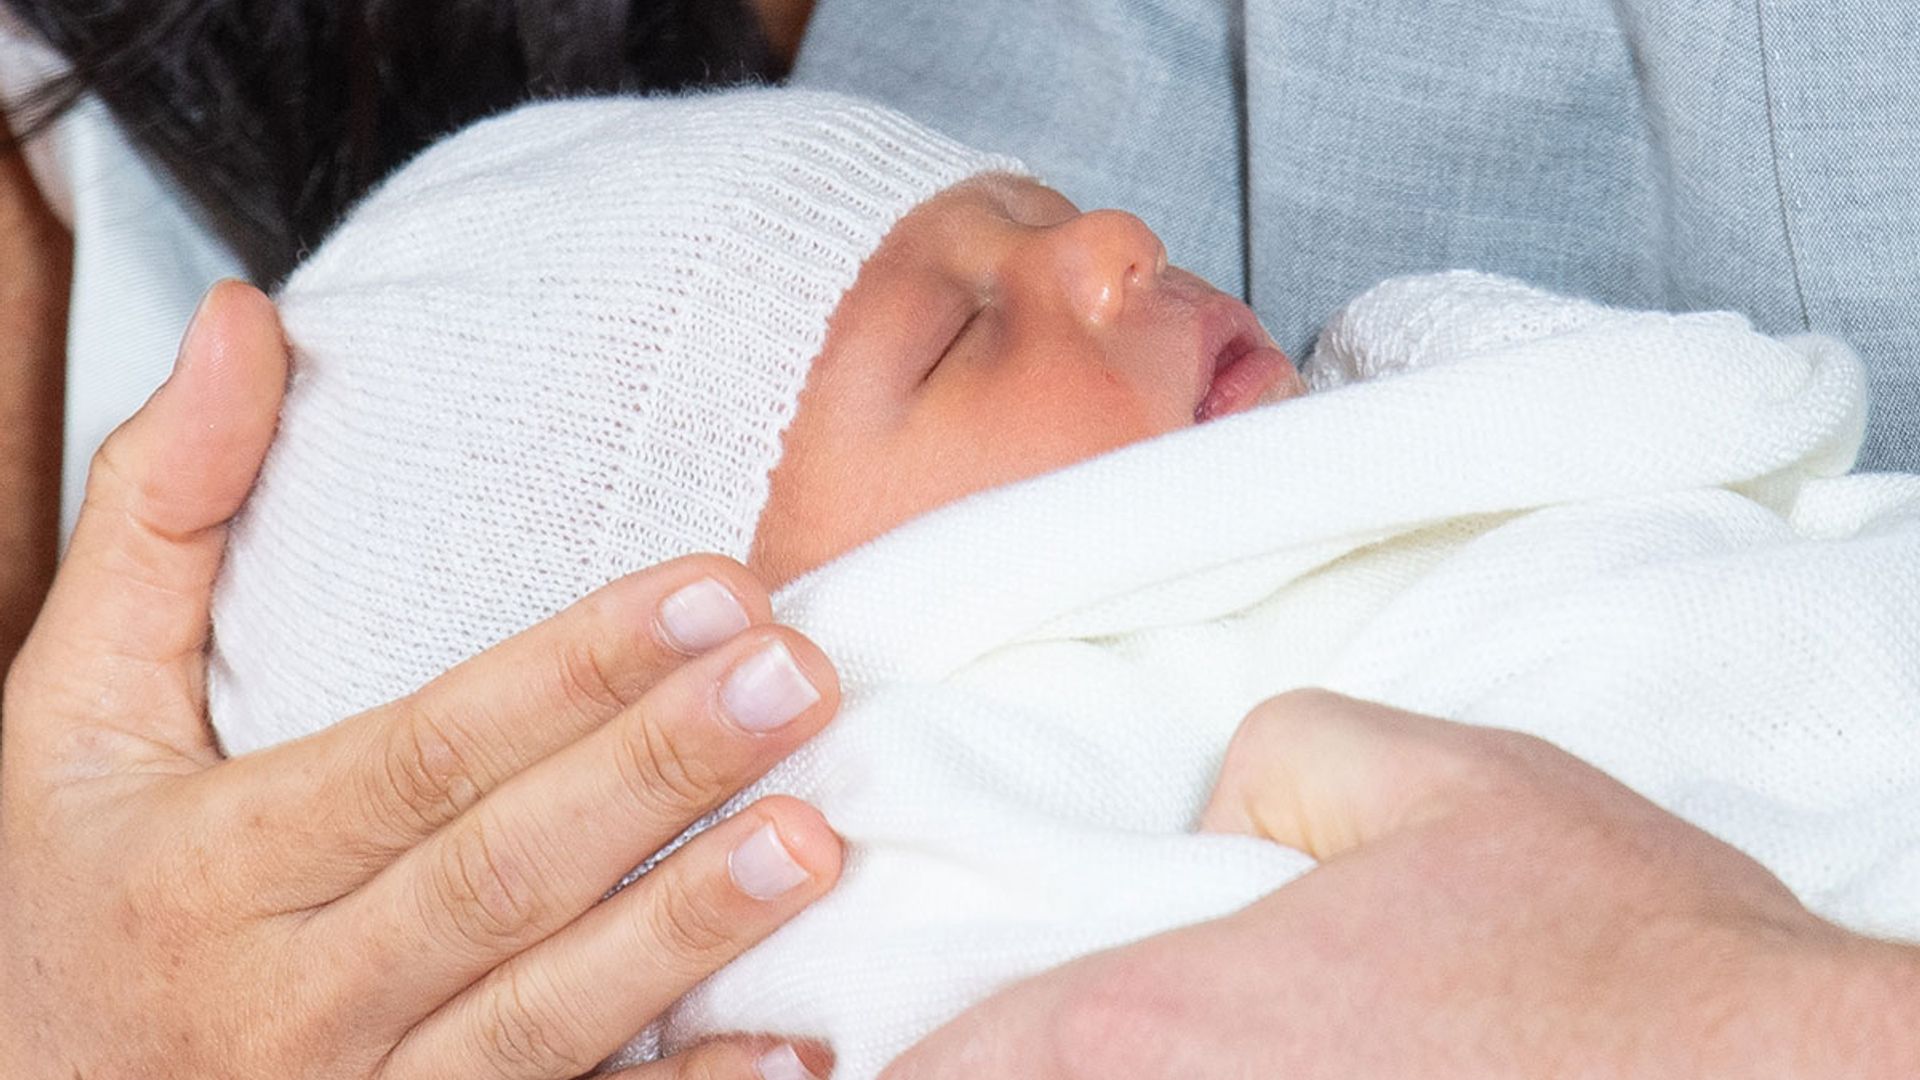 When we will next see Prince Harry and Meghan Markle's son Archie Harrison